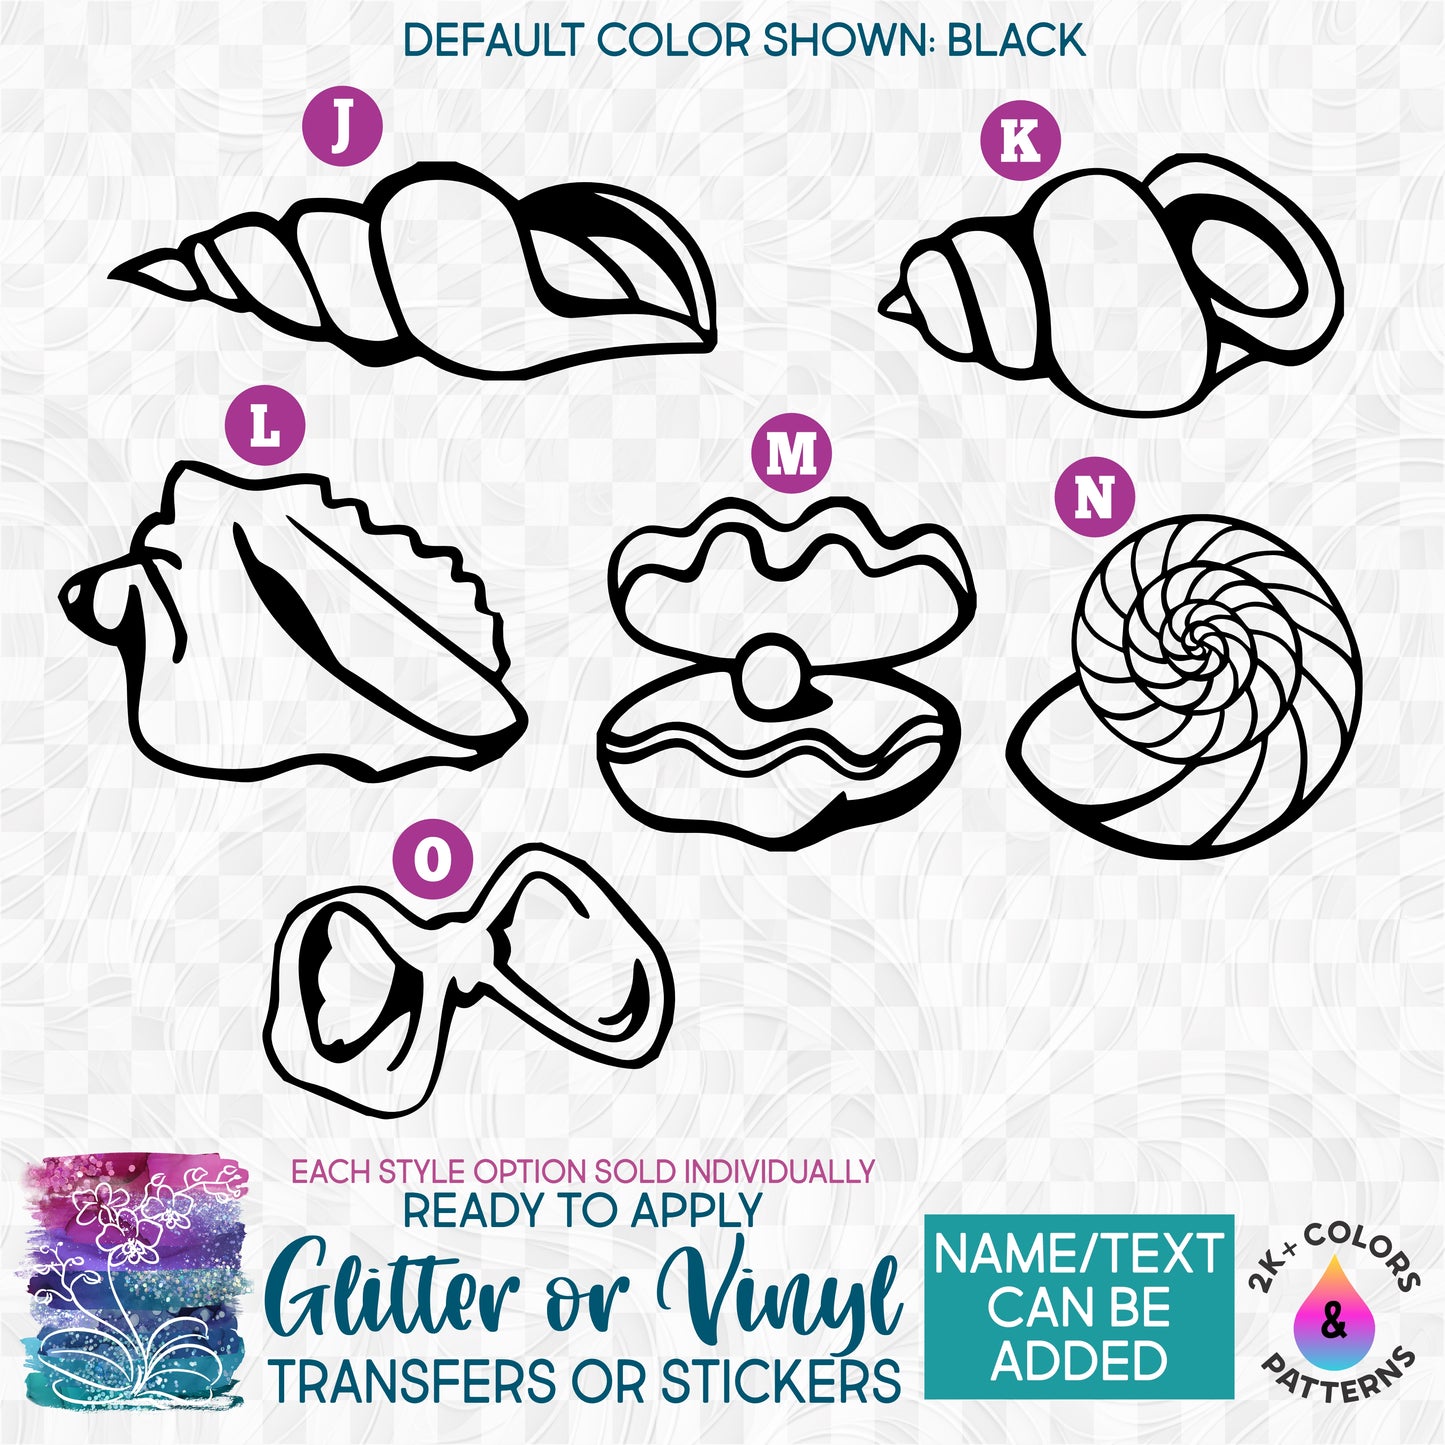 (s111) Sea Shells Conch Clam Oyster Shell Pearl Glitter or Vinyl Iron-On Transfer or Sticker